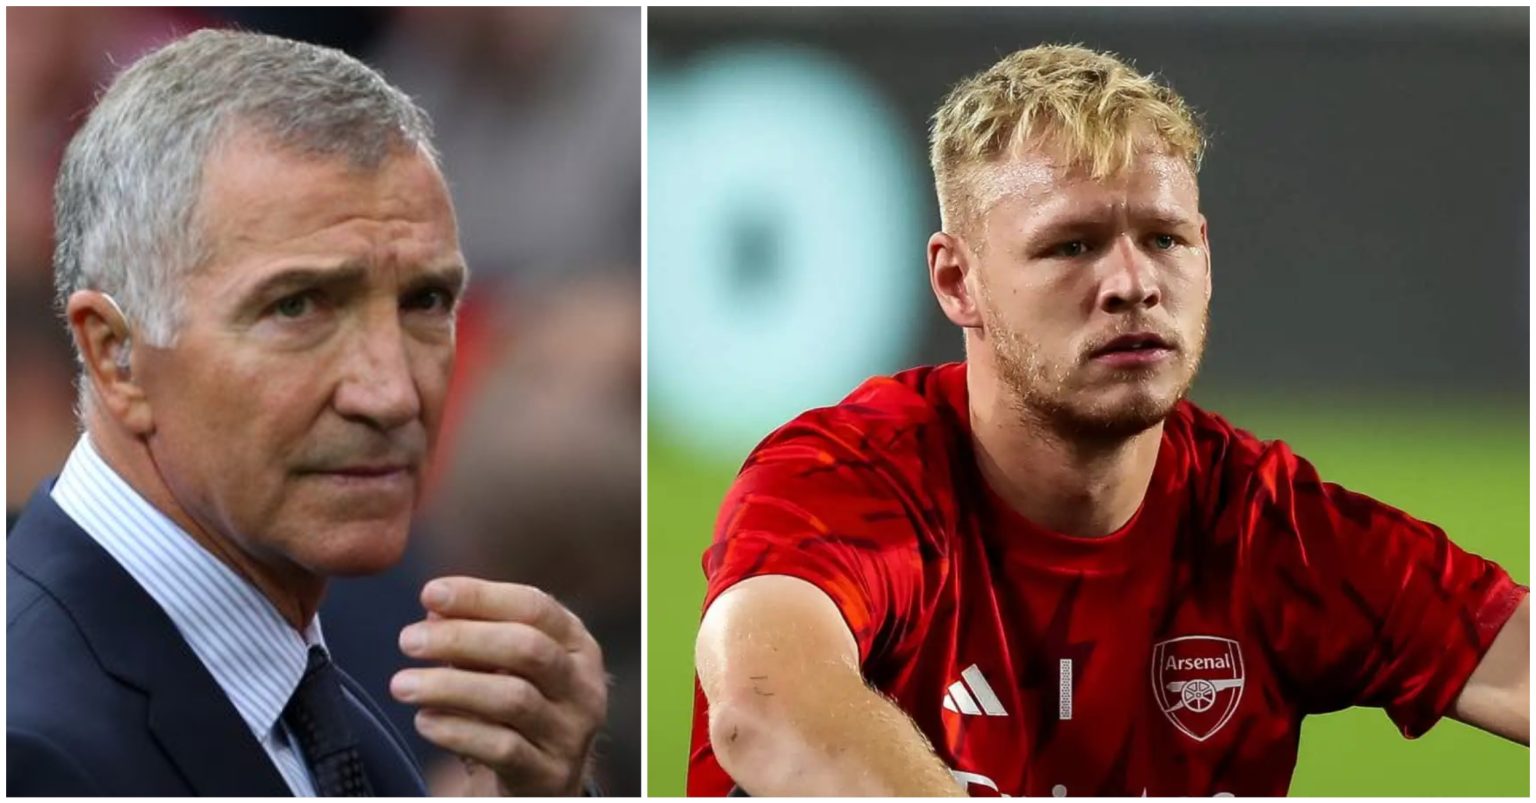 'Has to show what he is made of': Graeme Souness tells Aaron Ramsdale not to give up but rather have a strong mentality like Man Utd's Harry Maguire